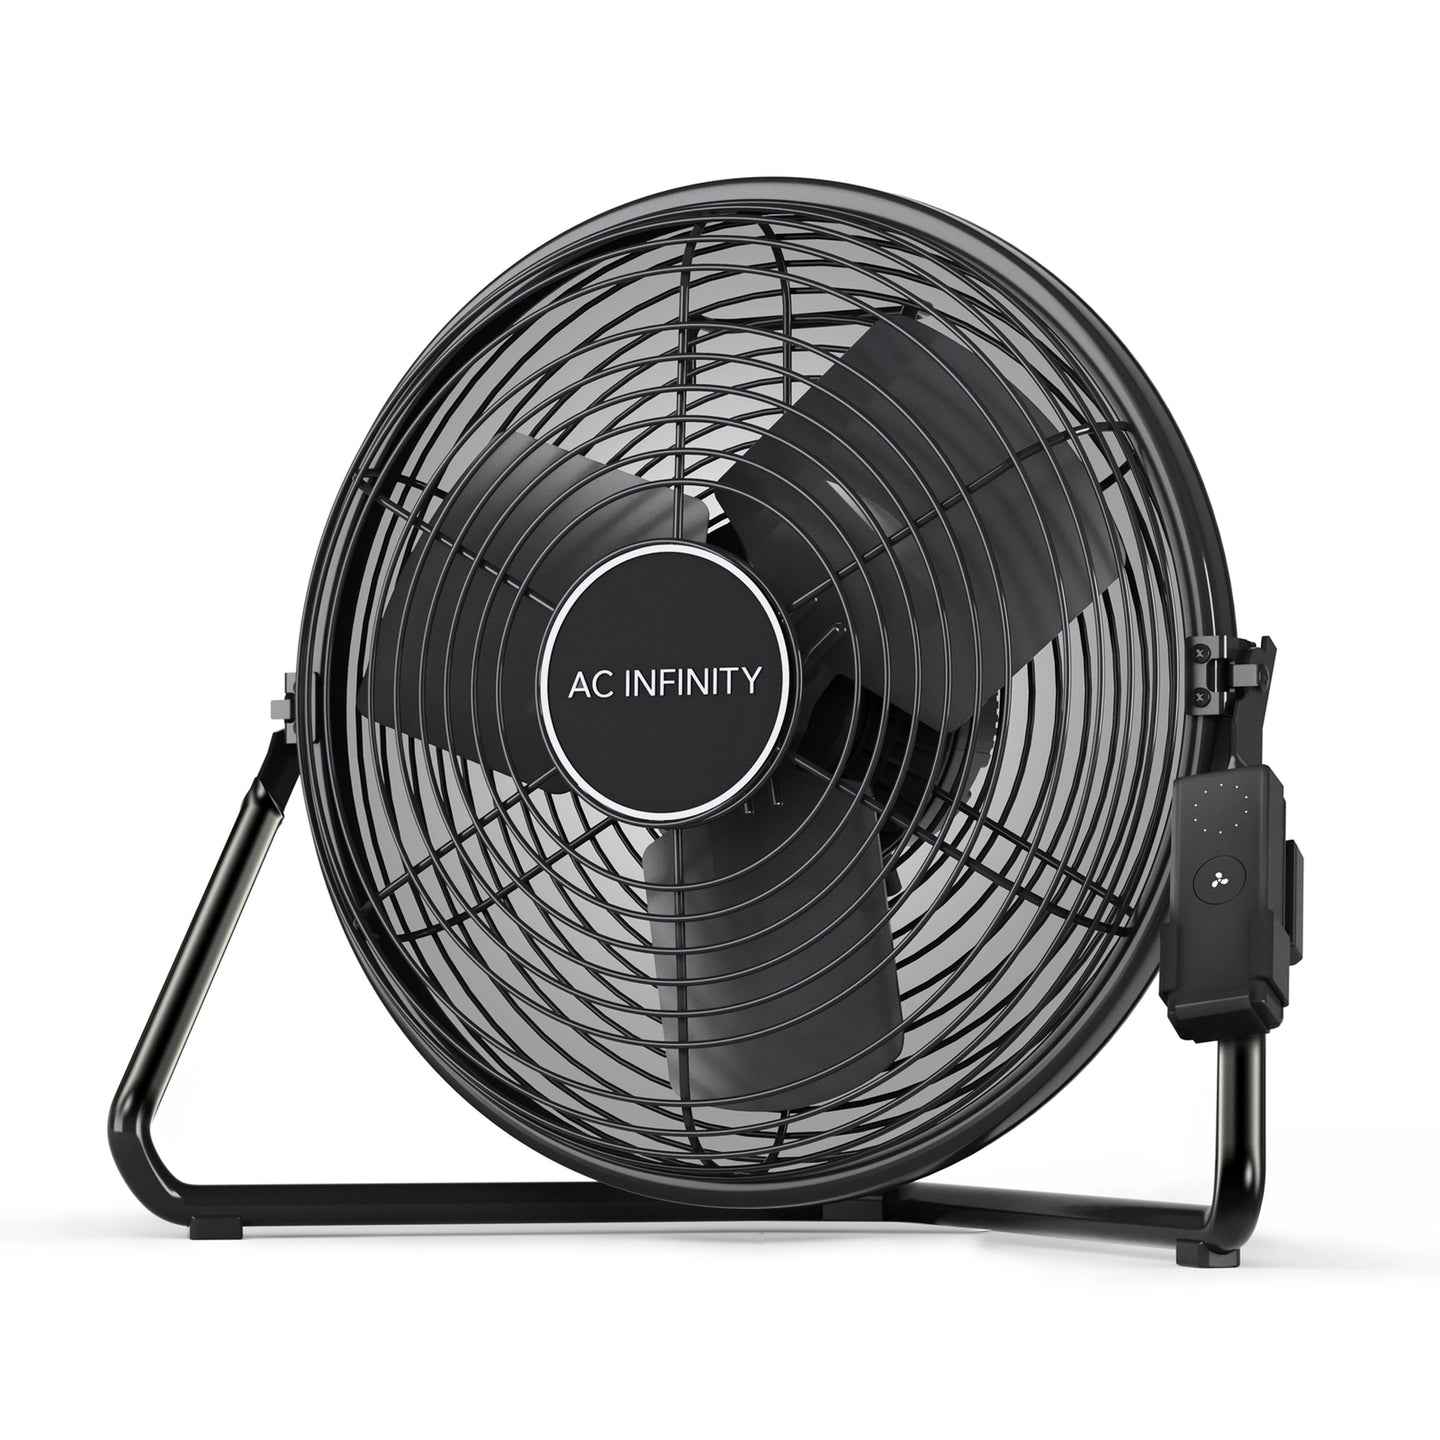 AC Infinity CLOUDLIFT S14, Floor Wall Fan with Wireless Controller, 14-Inch